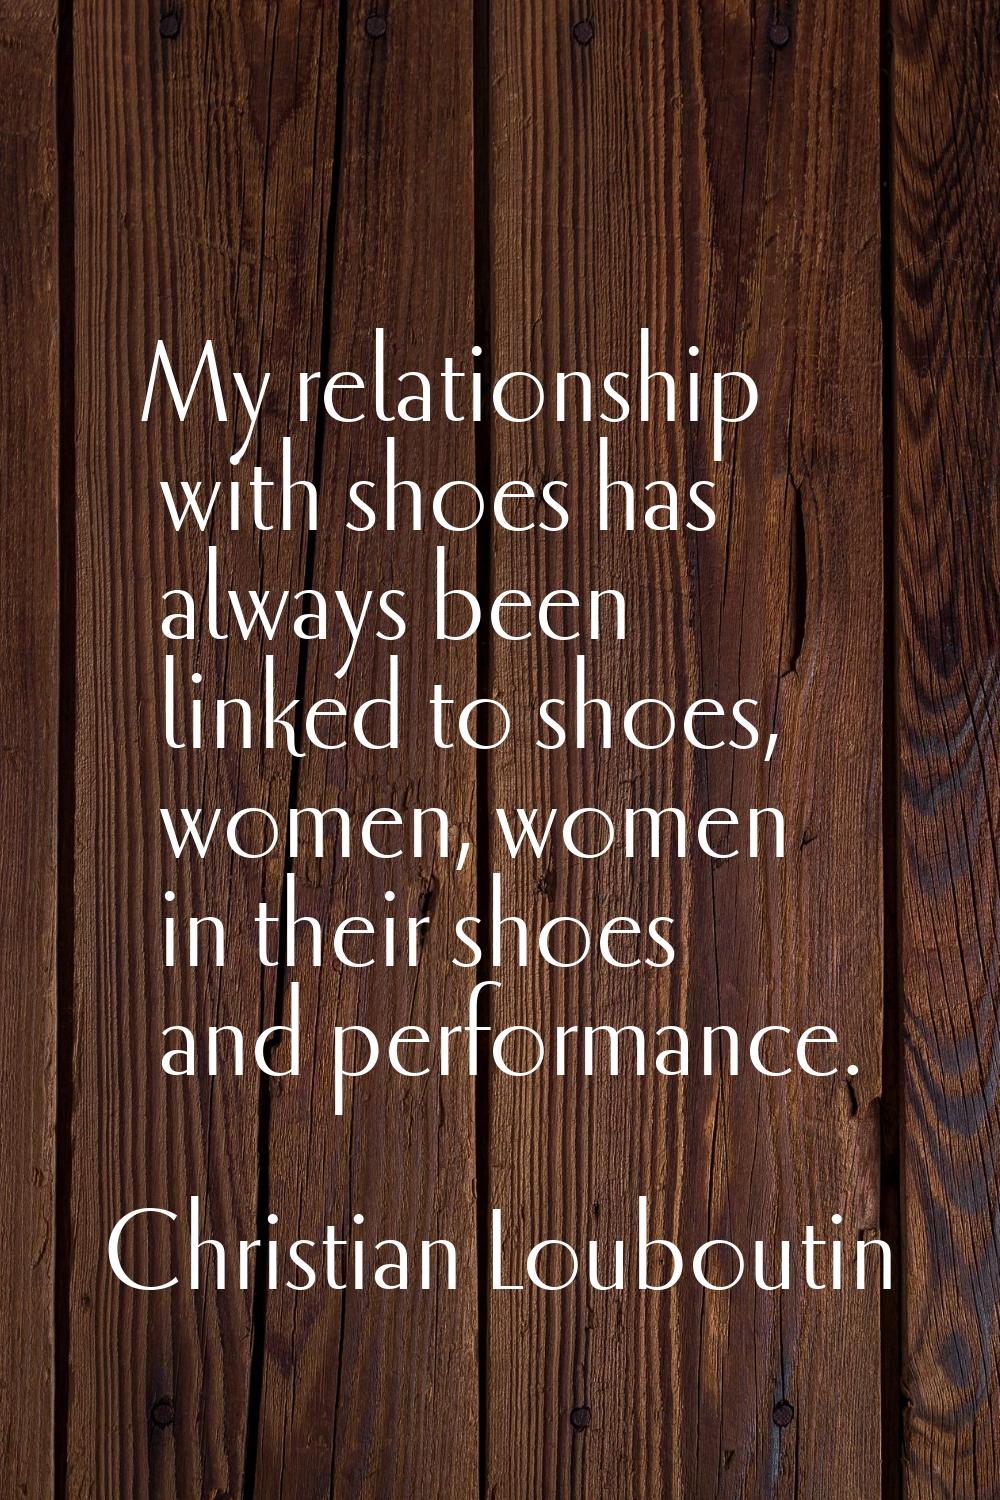 My relationship with shoes has always been linked to shoes, women, women in their shoes and perform